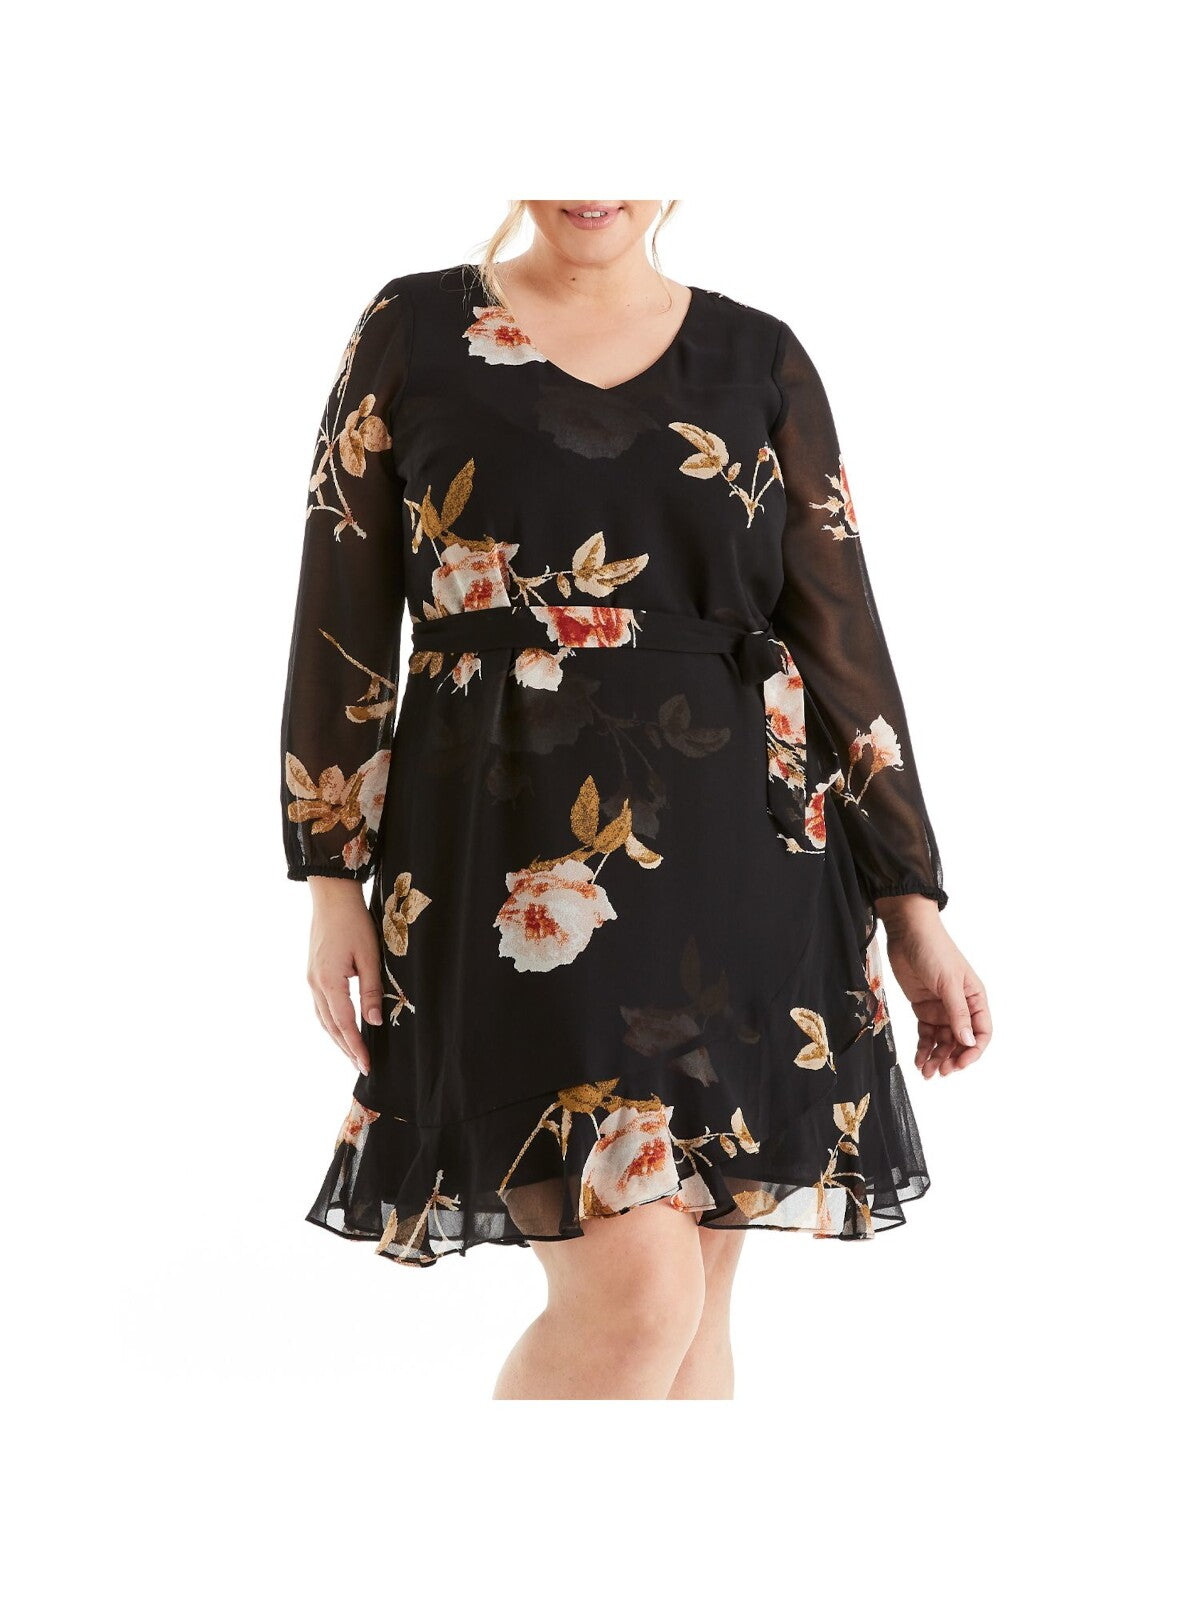 ESTELLE Womens Black Ruffled Sheer Tie Lined Floral Long Sleeve V Neck Above The Knee Evening Fit + Flare Dress Plus 1X